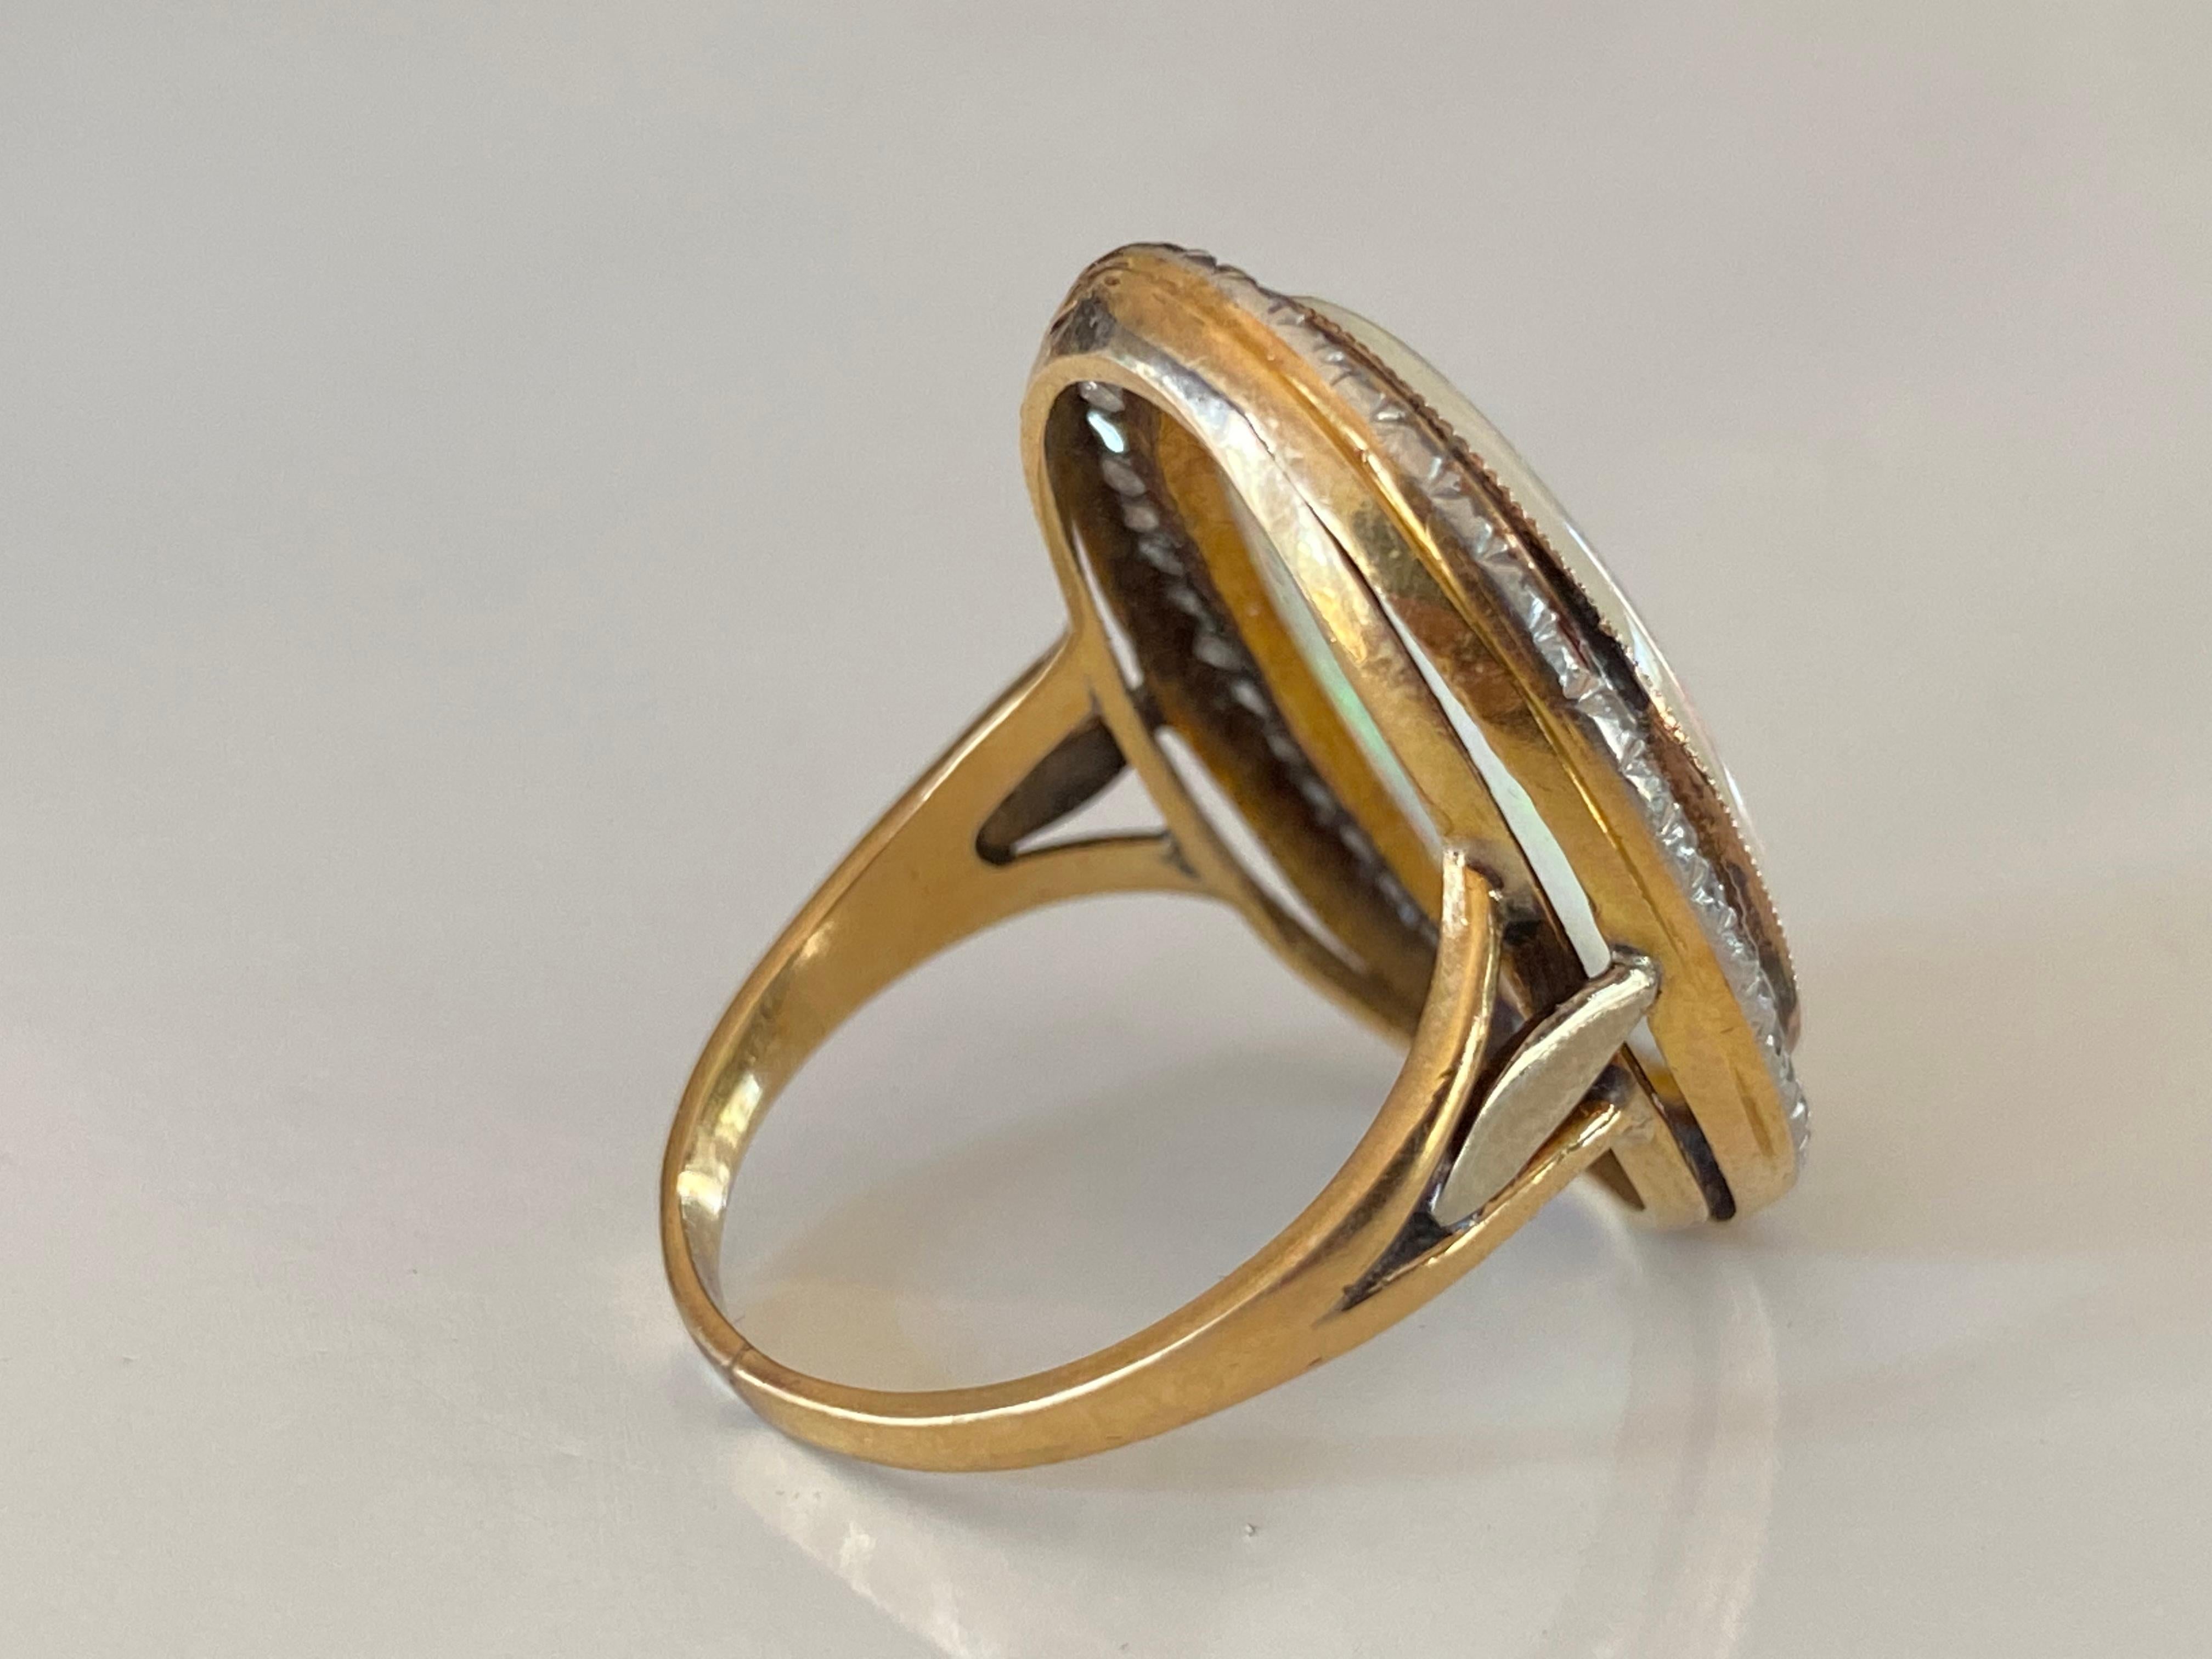 Vintage Two-Tone Australian Opal and Diamond Cocktail Ring In Good Condition For Sale In Denver, CO